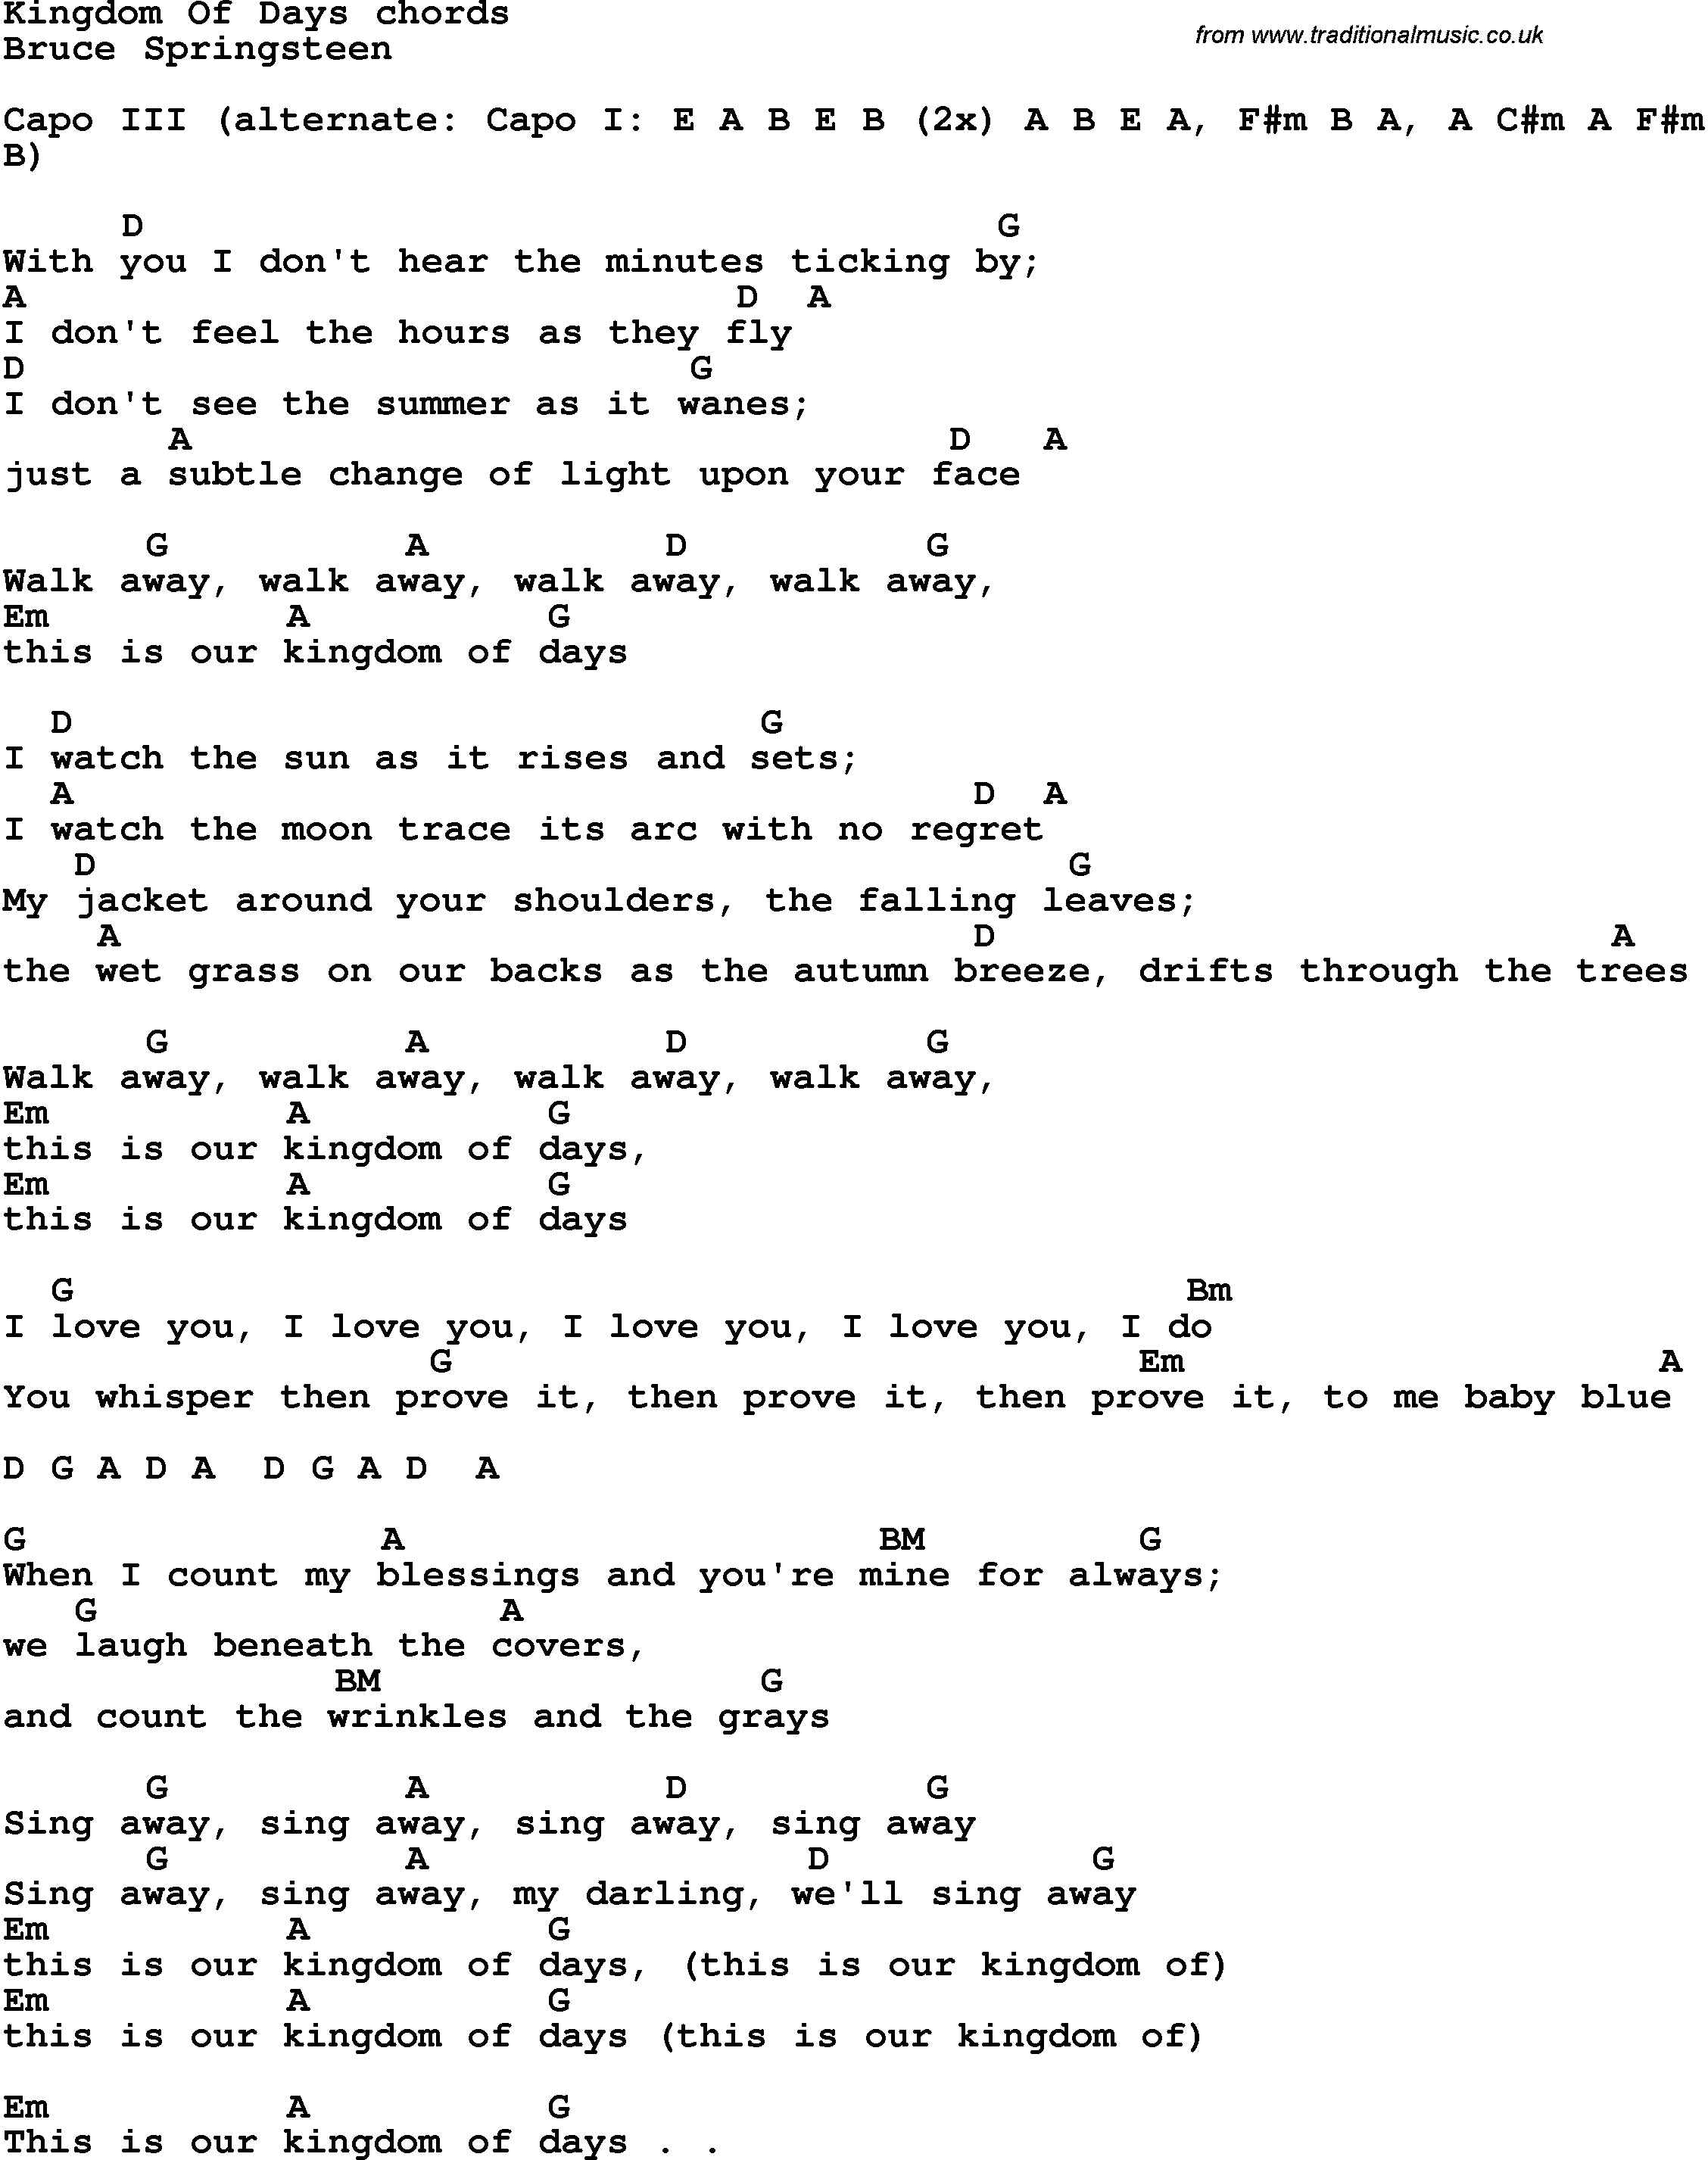 Song Lyrics with guitar chords for Kingdom Of Days